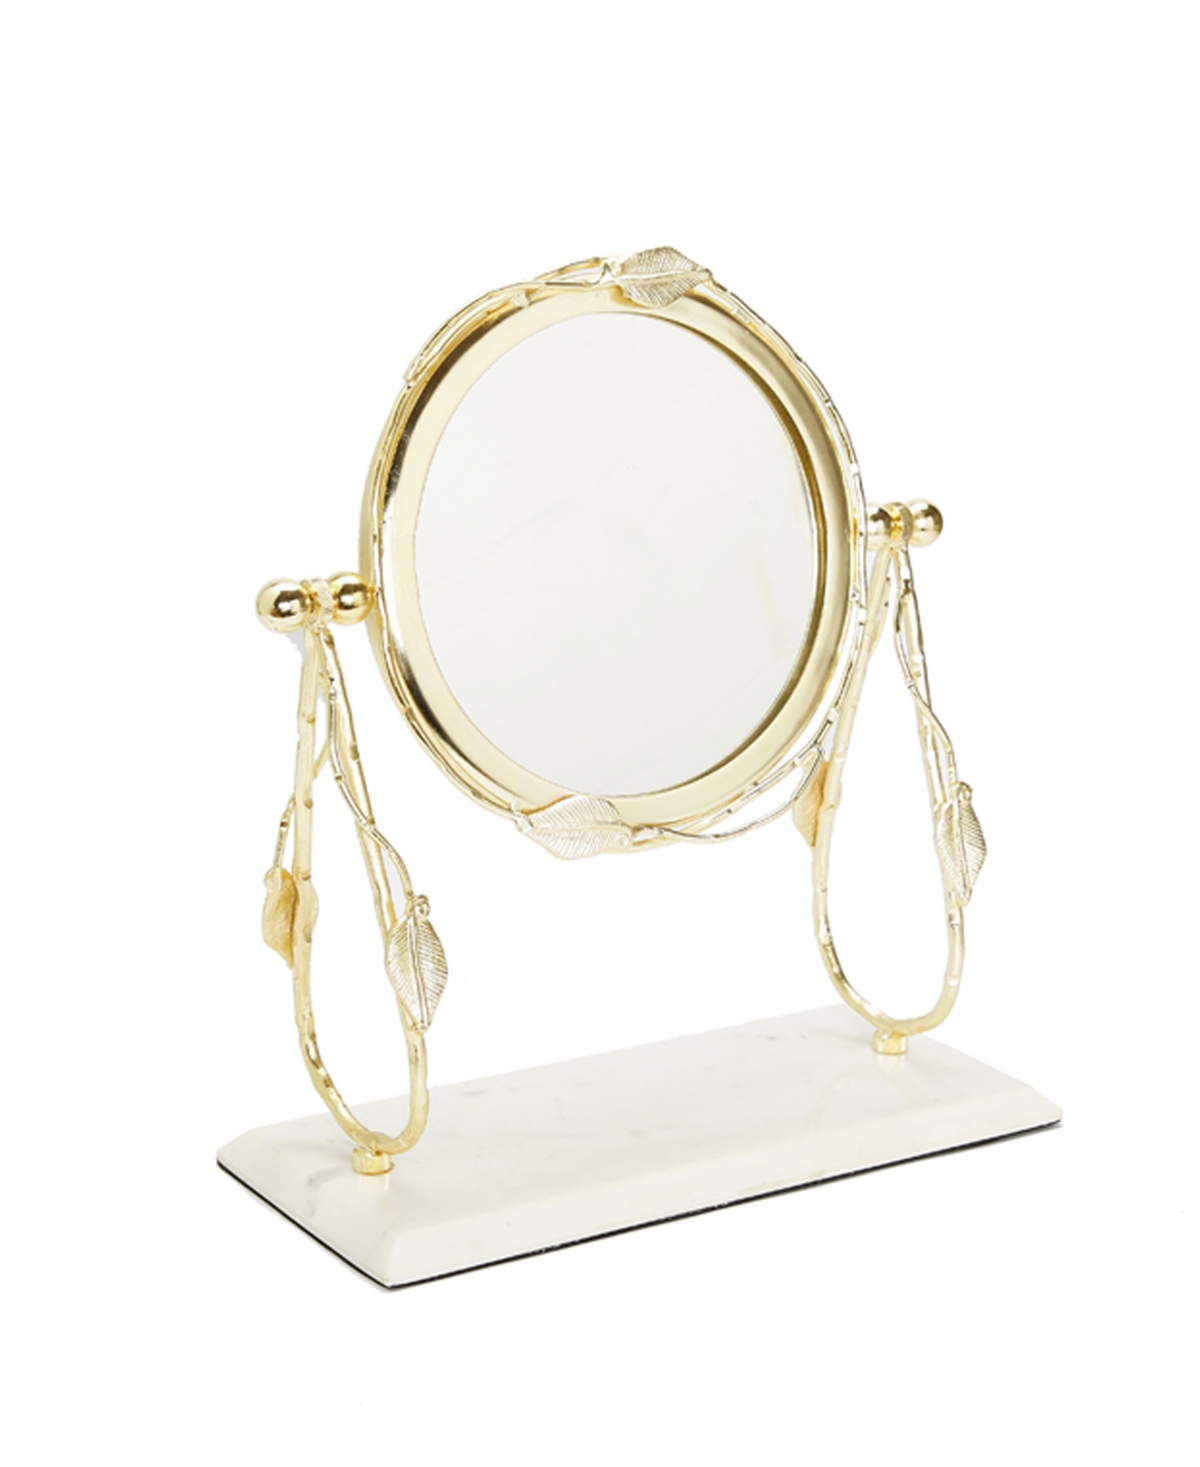 Table Mirror with Leaf Design Border and Marble Base, 5" x 14" - Gold-Tone